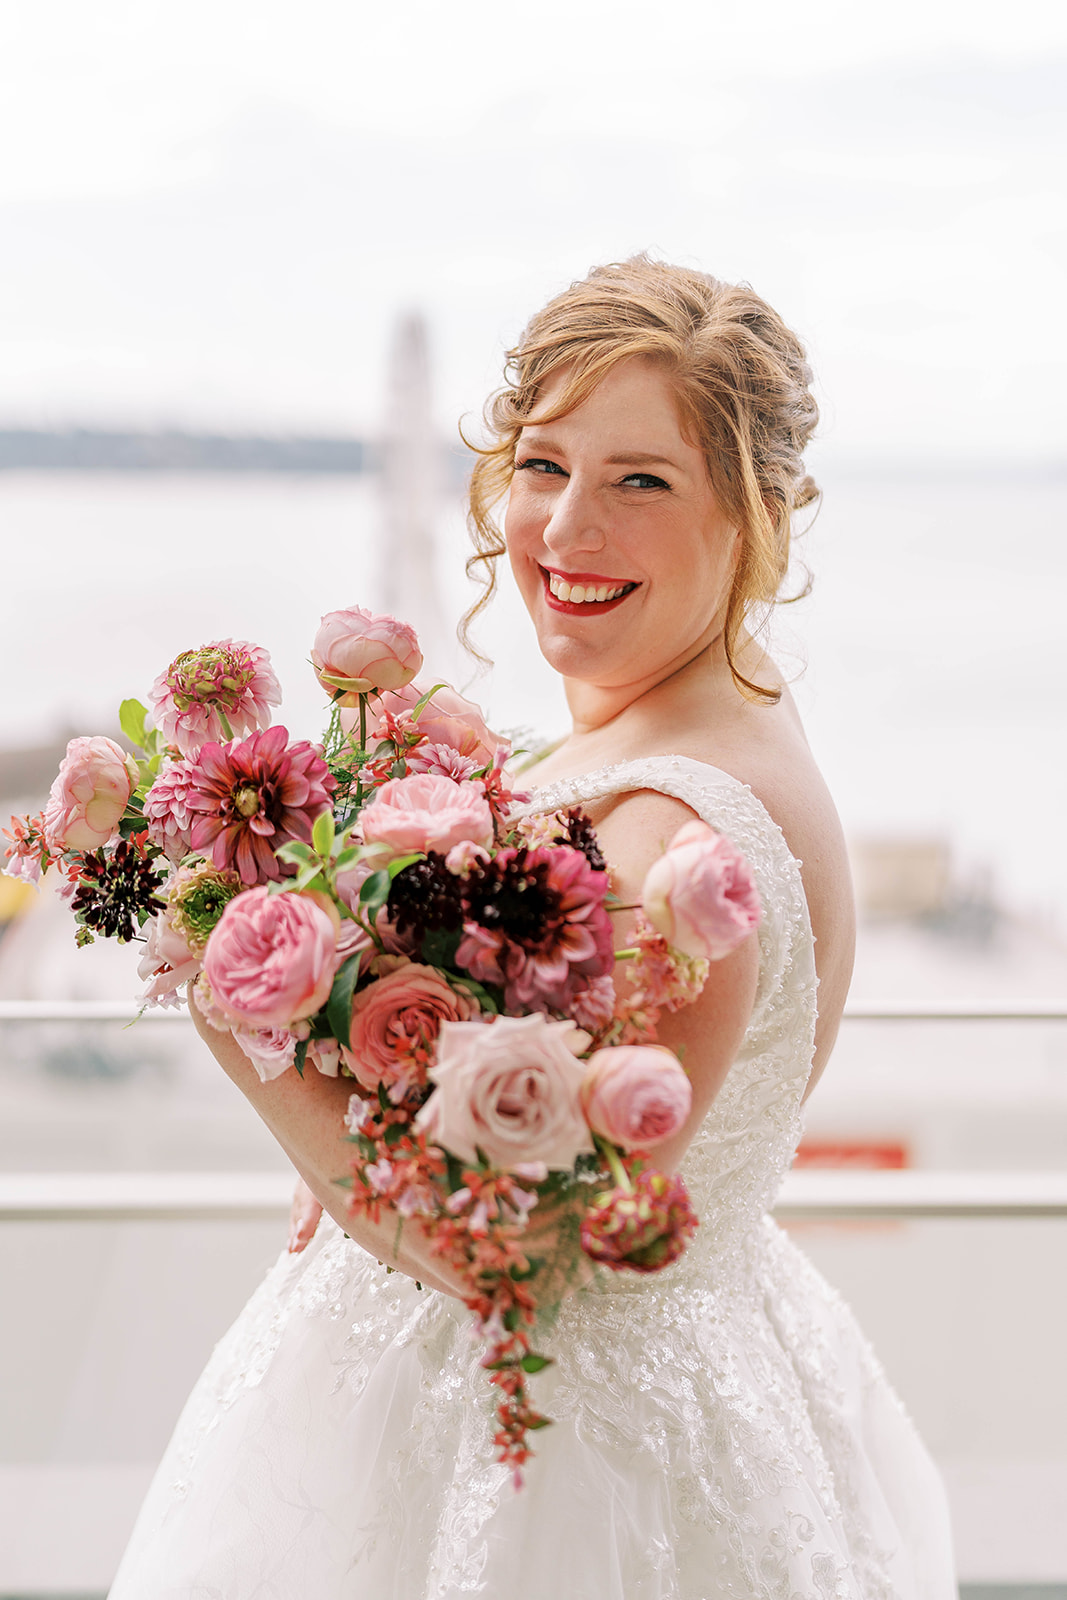 Bride smiles as she poses with her oval bridal bouquet in shades of pink flowers.